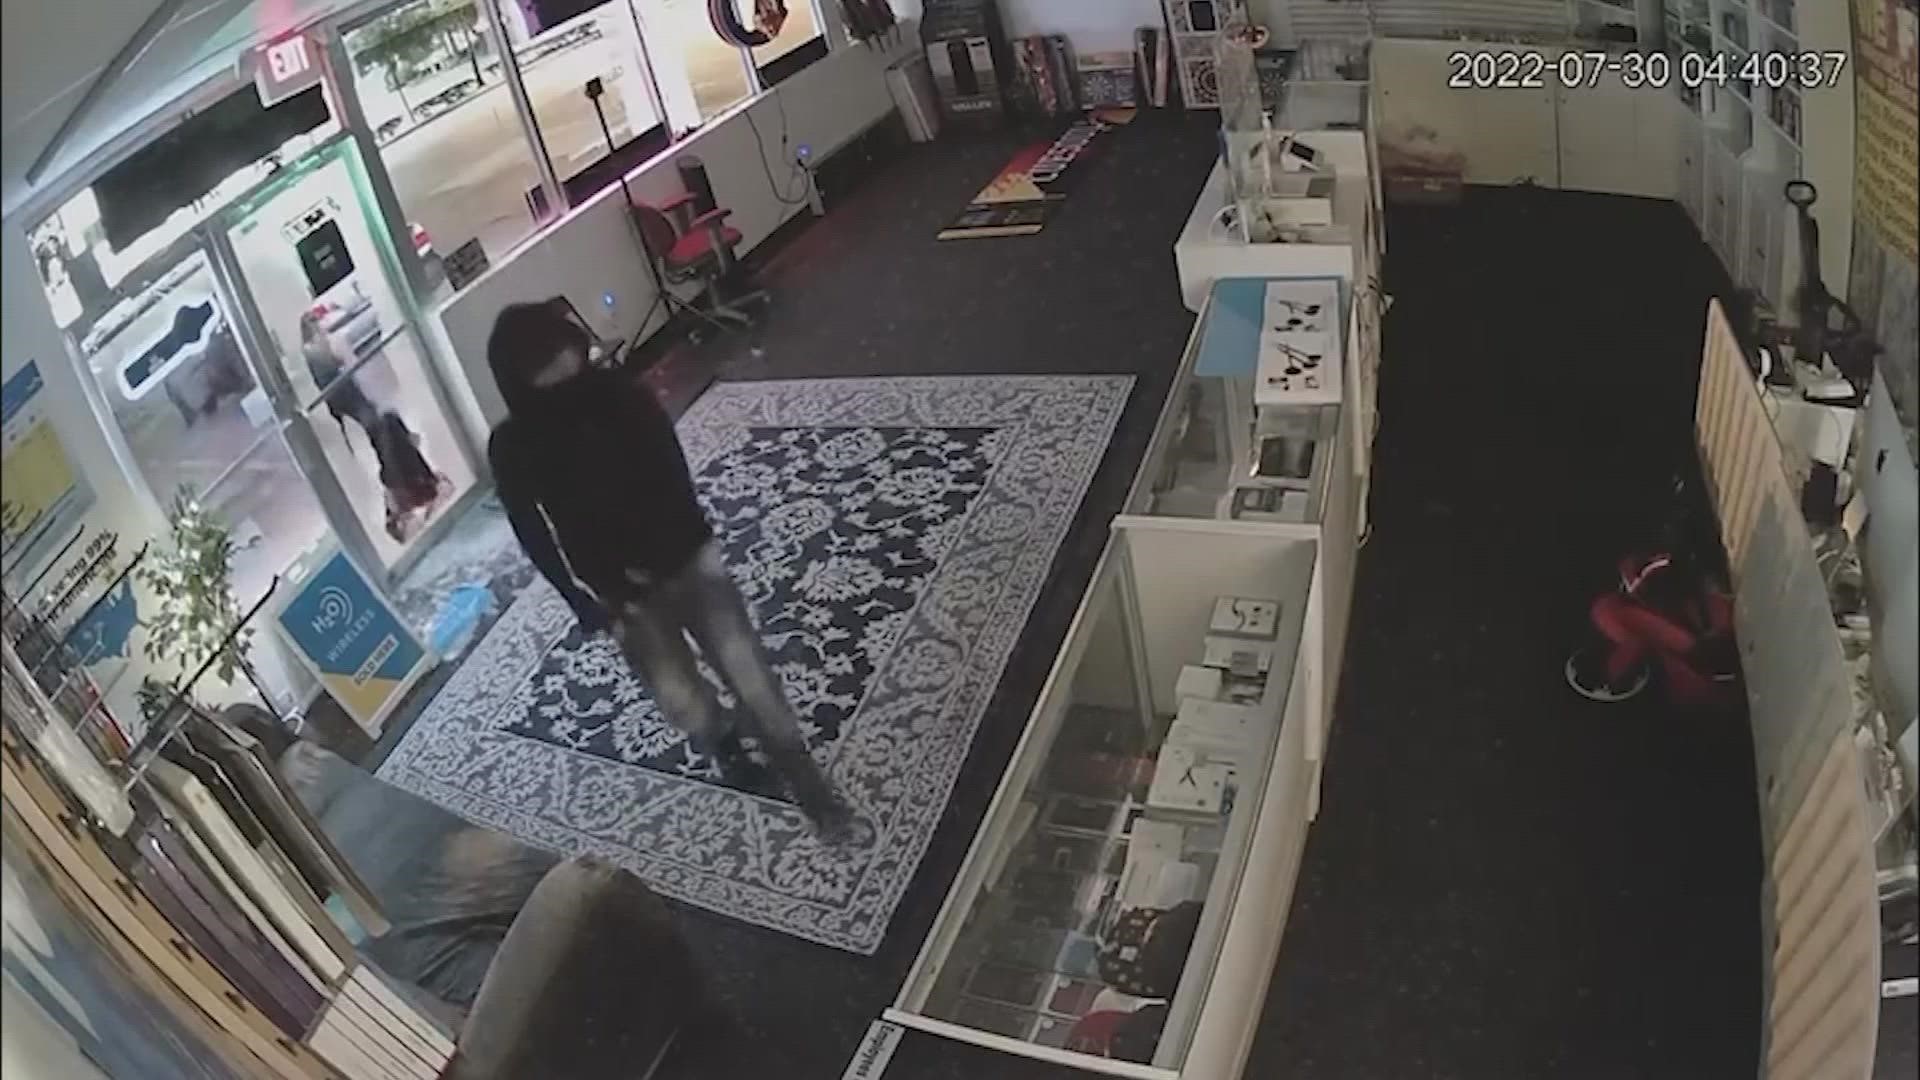 The 24 break-ins happened within a few hours at businesses in shopping centers along a part of Kingwood Drive.